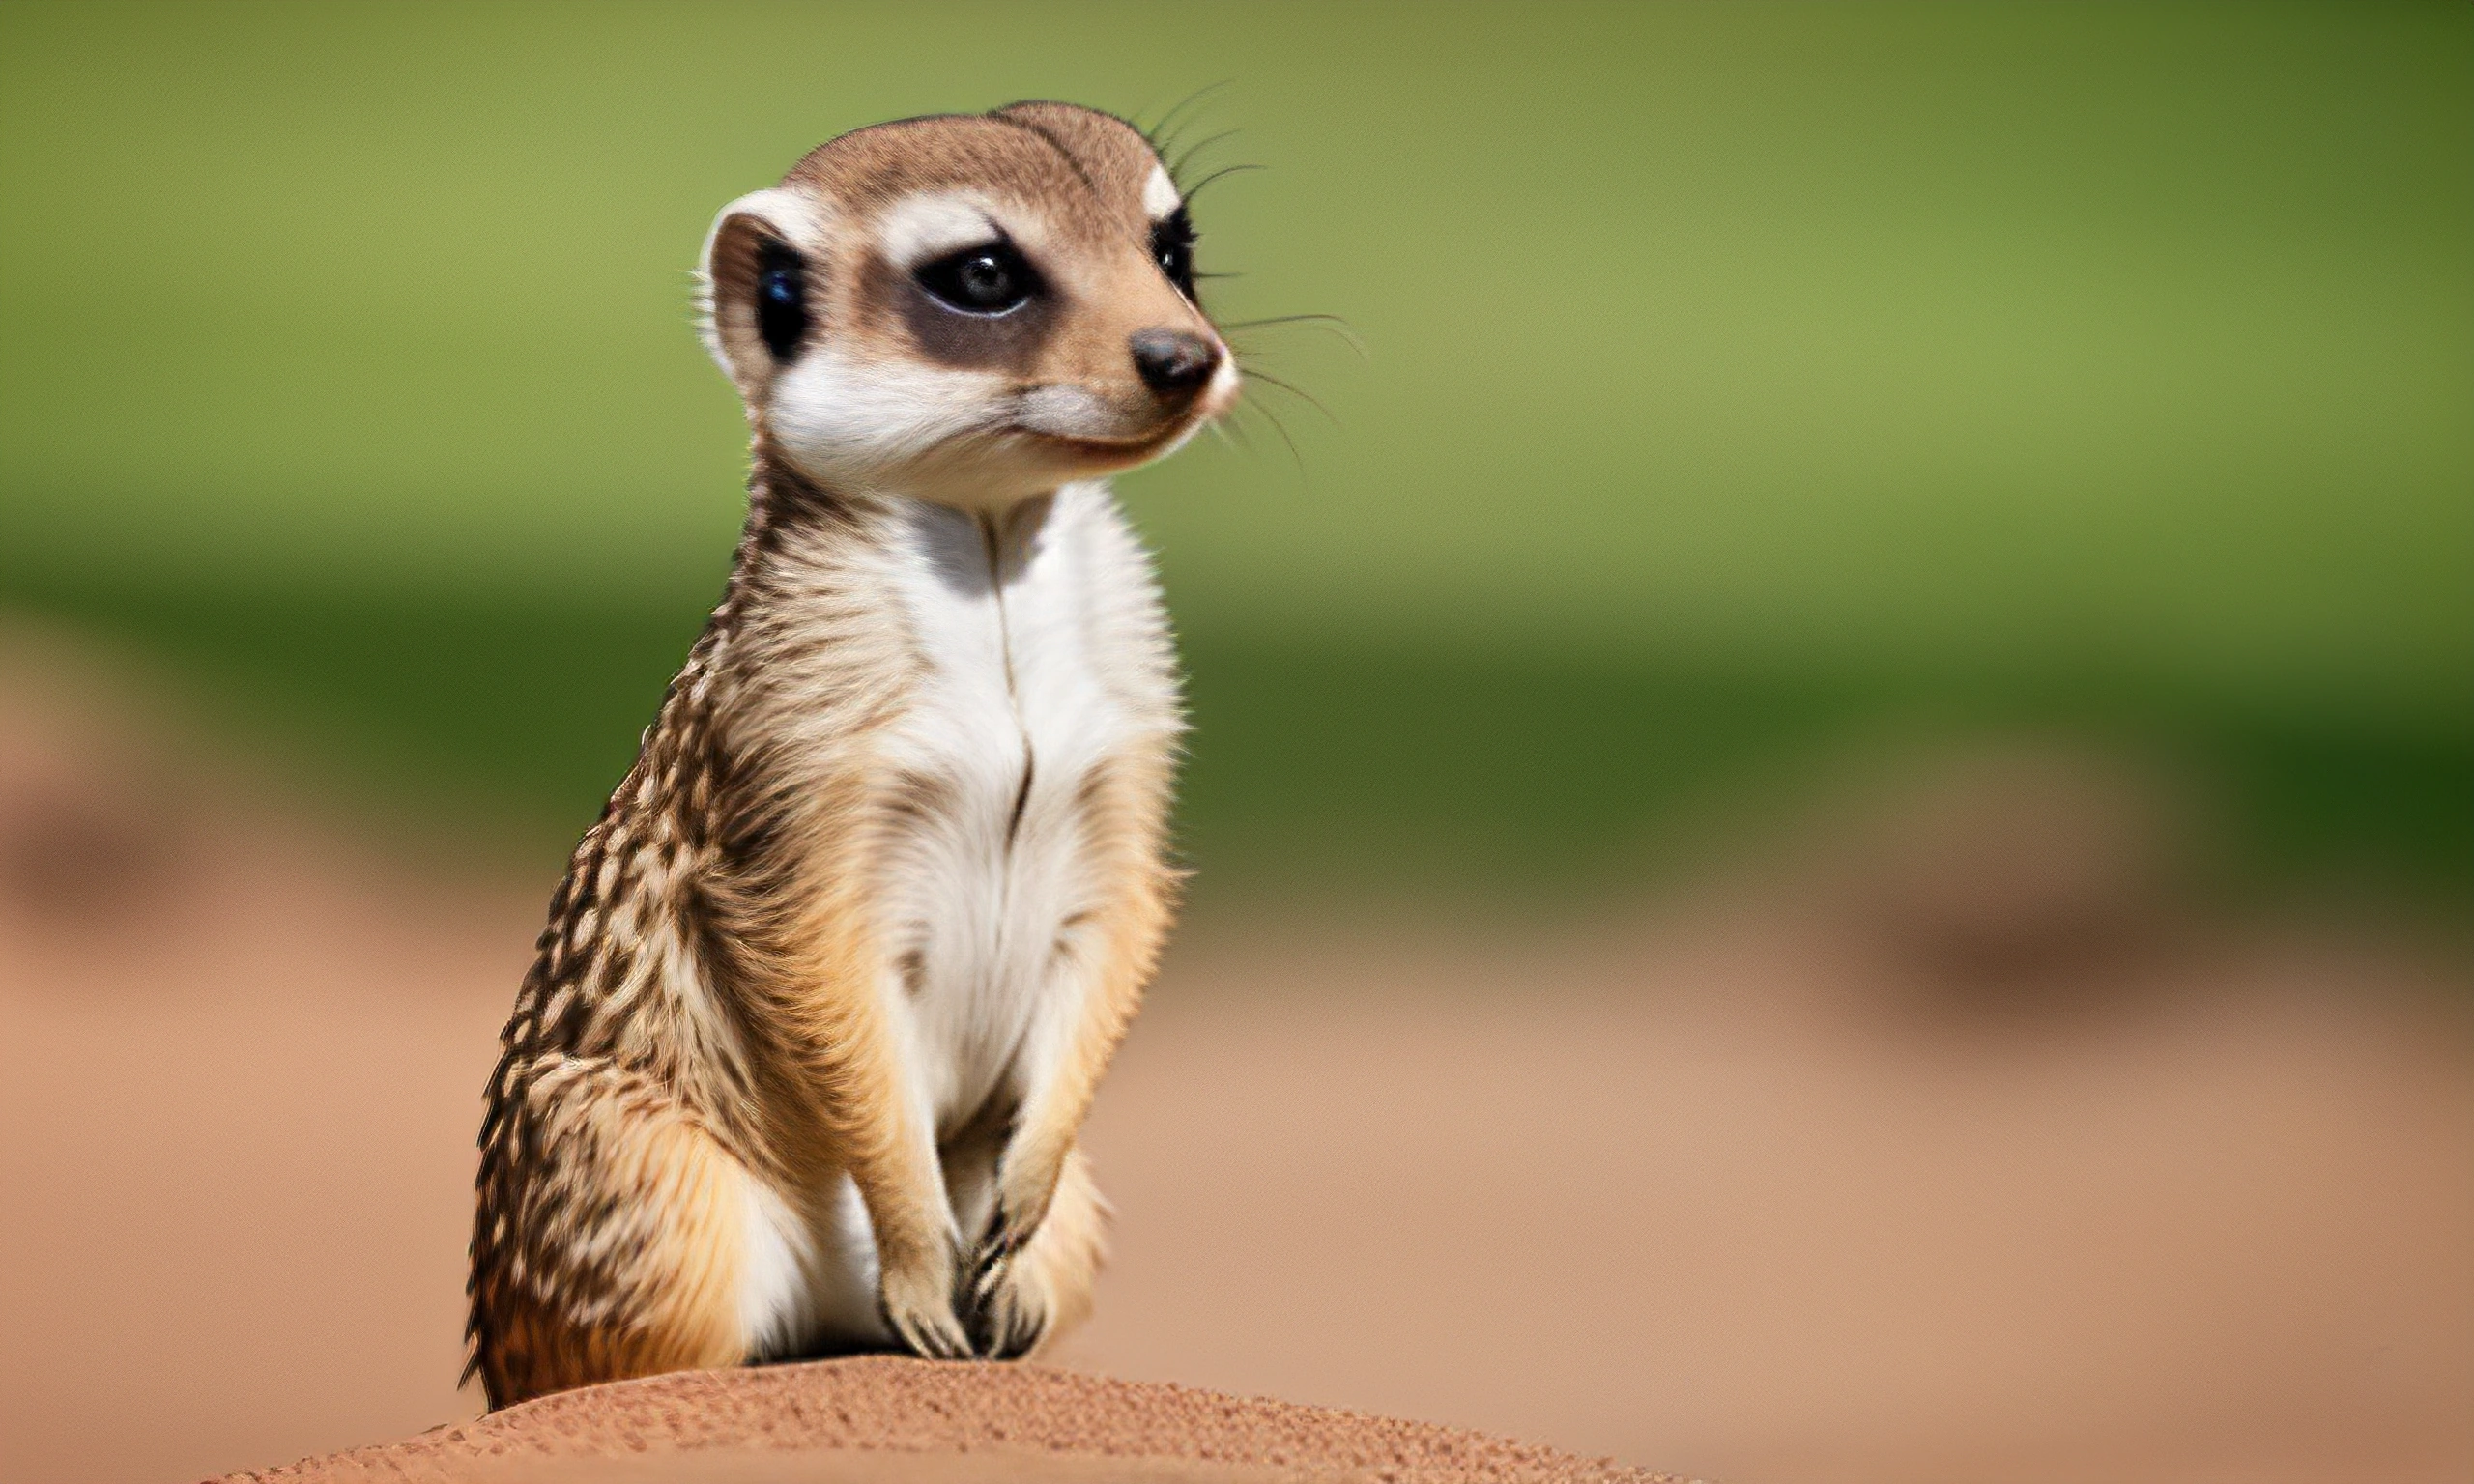 a small animal that is standing on a mound